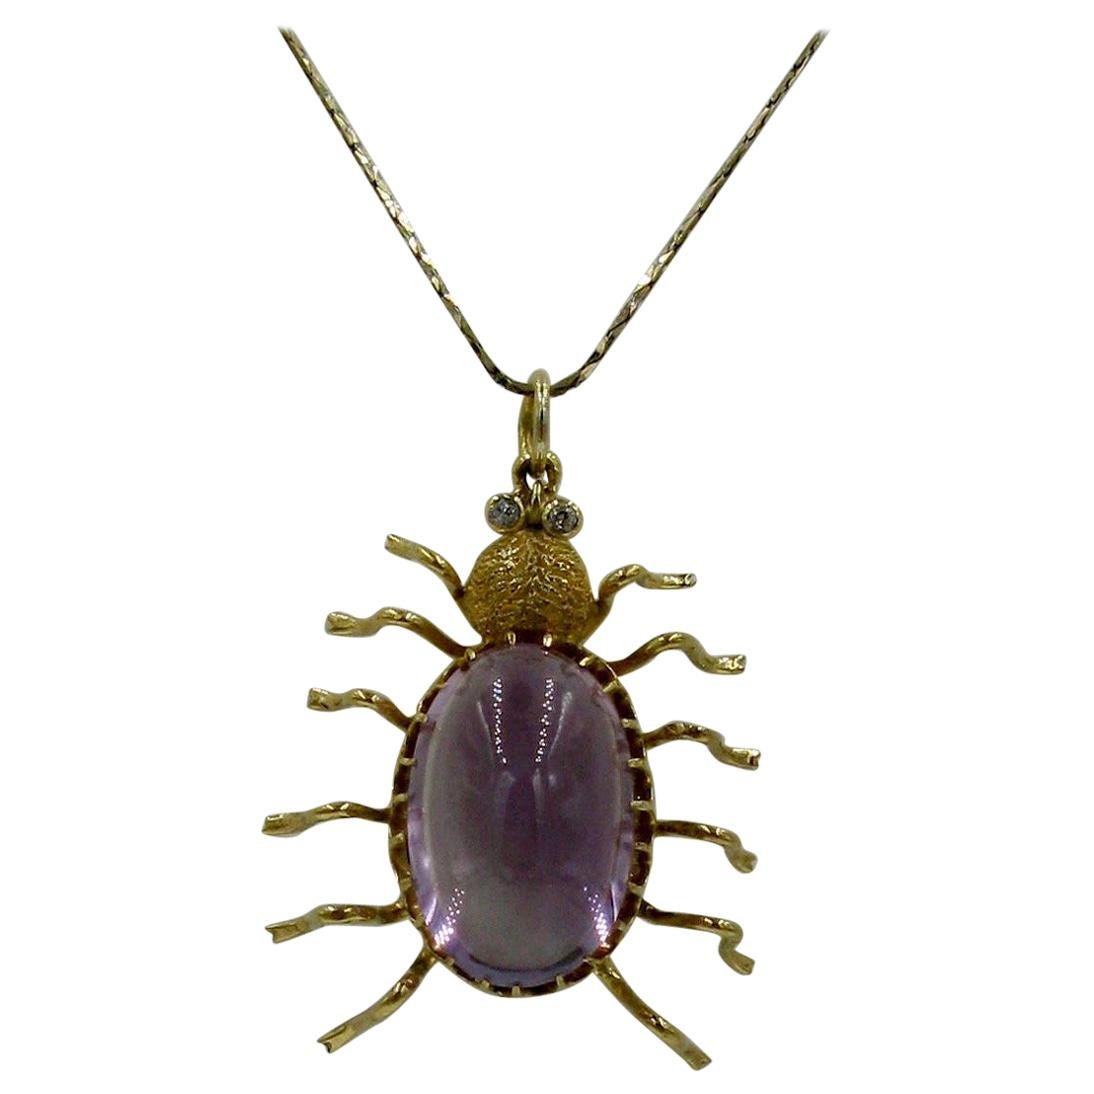 Antique 10 Carat Amethyst Diamond Spider Insect Pendant Necklace Vintage Gold For Sale